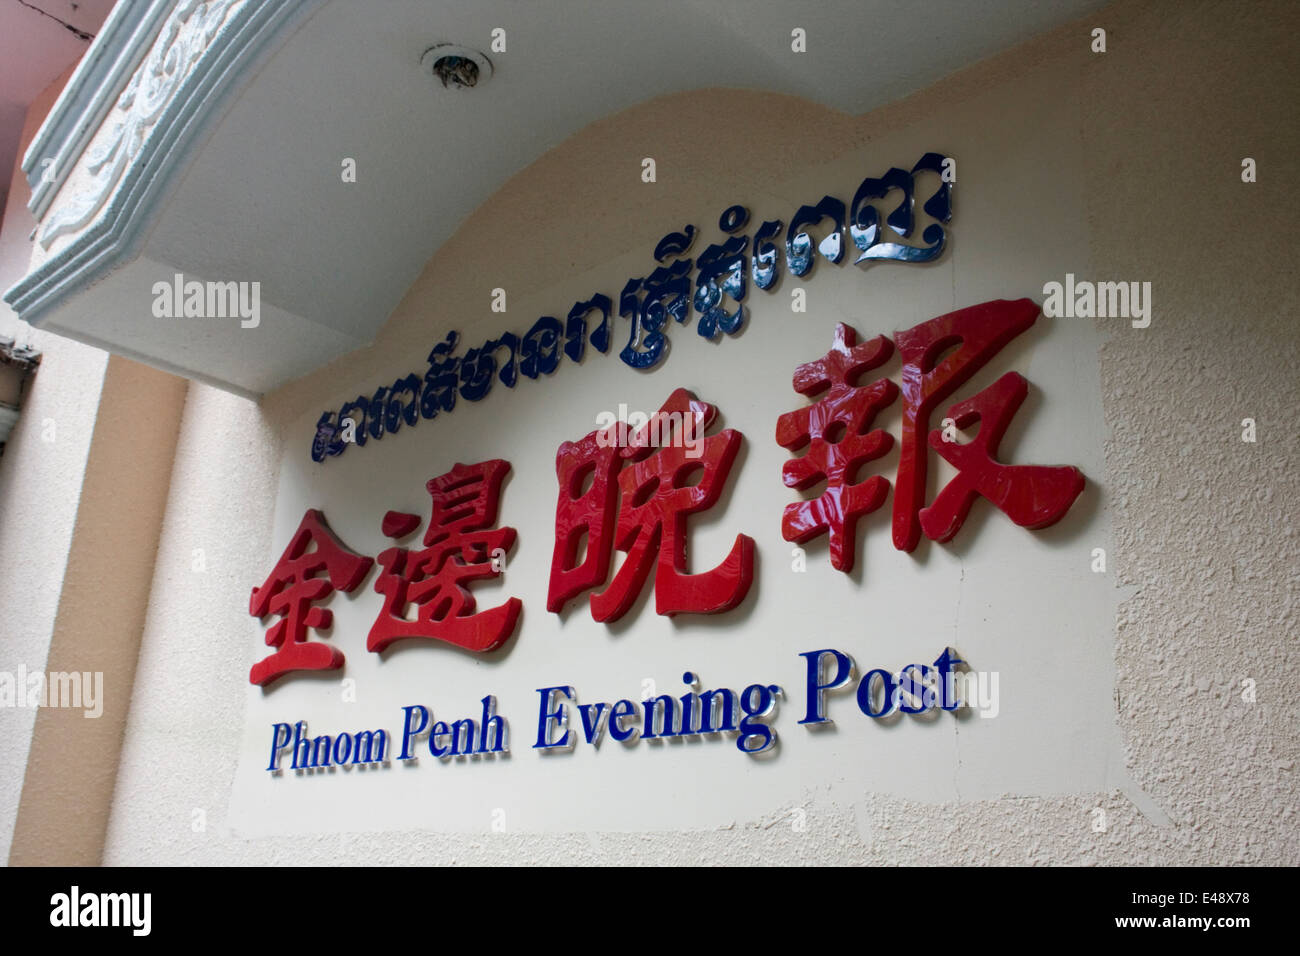 A sign on a wall written in Khmer and Chinese signifies the location of the Phnom Penh Evening Post in Phnom Penh, Cambodia. Stock Photo